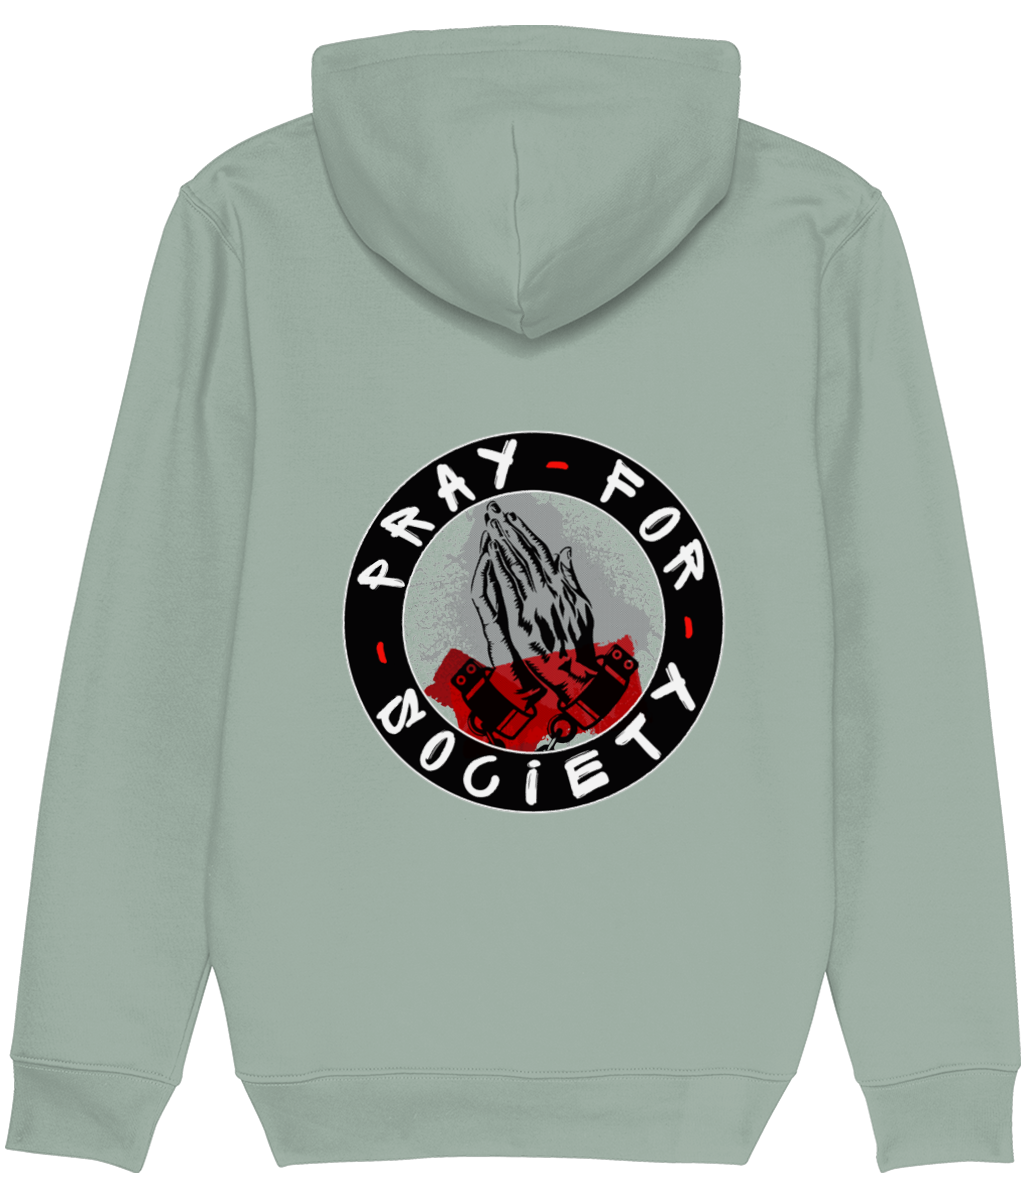 Pray For Society - Hoodie - 5 Colours